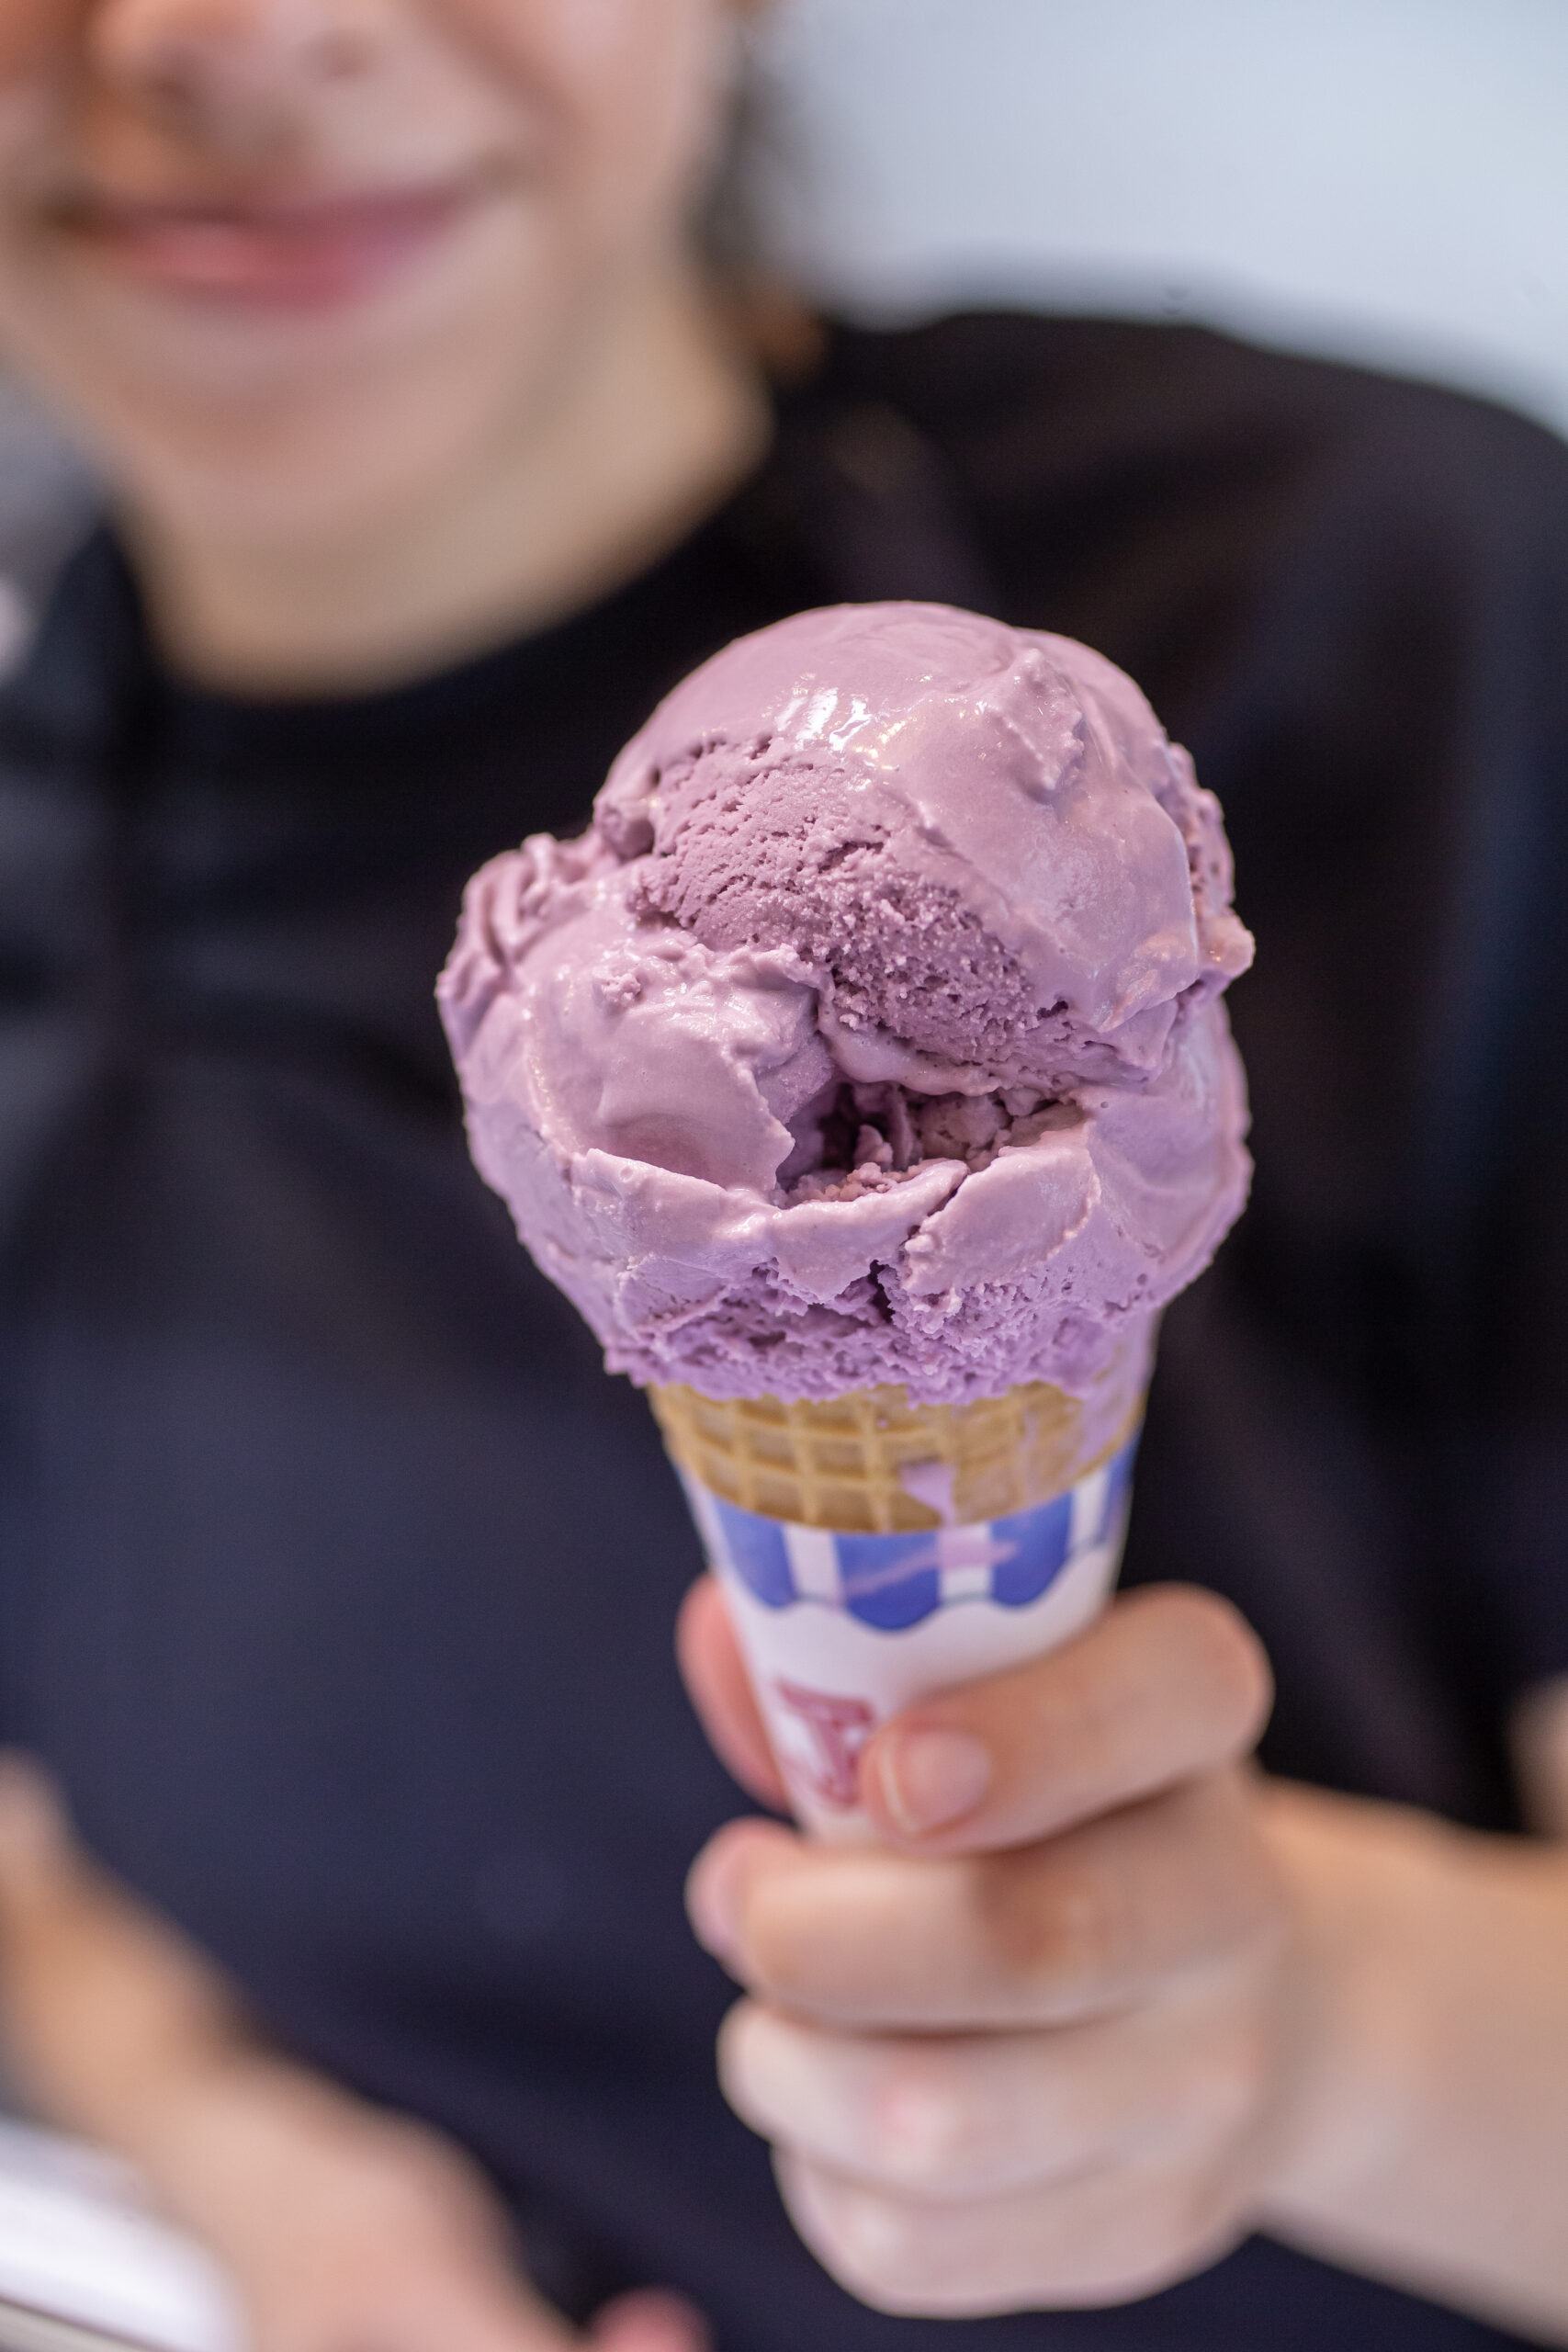 Lavender Angela’s Organic ice cream is served in a sugar cone at Iggy’s Organic Burgers on the plaza, Friday in Downtown Healdsburg June 30, 2023. (Chad Surmick / The Press Democrat)